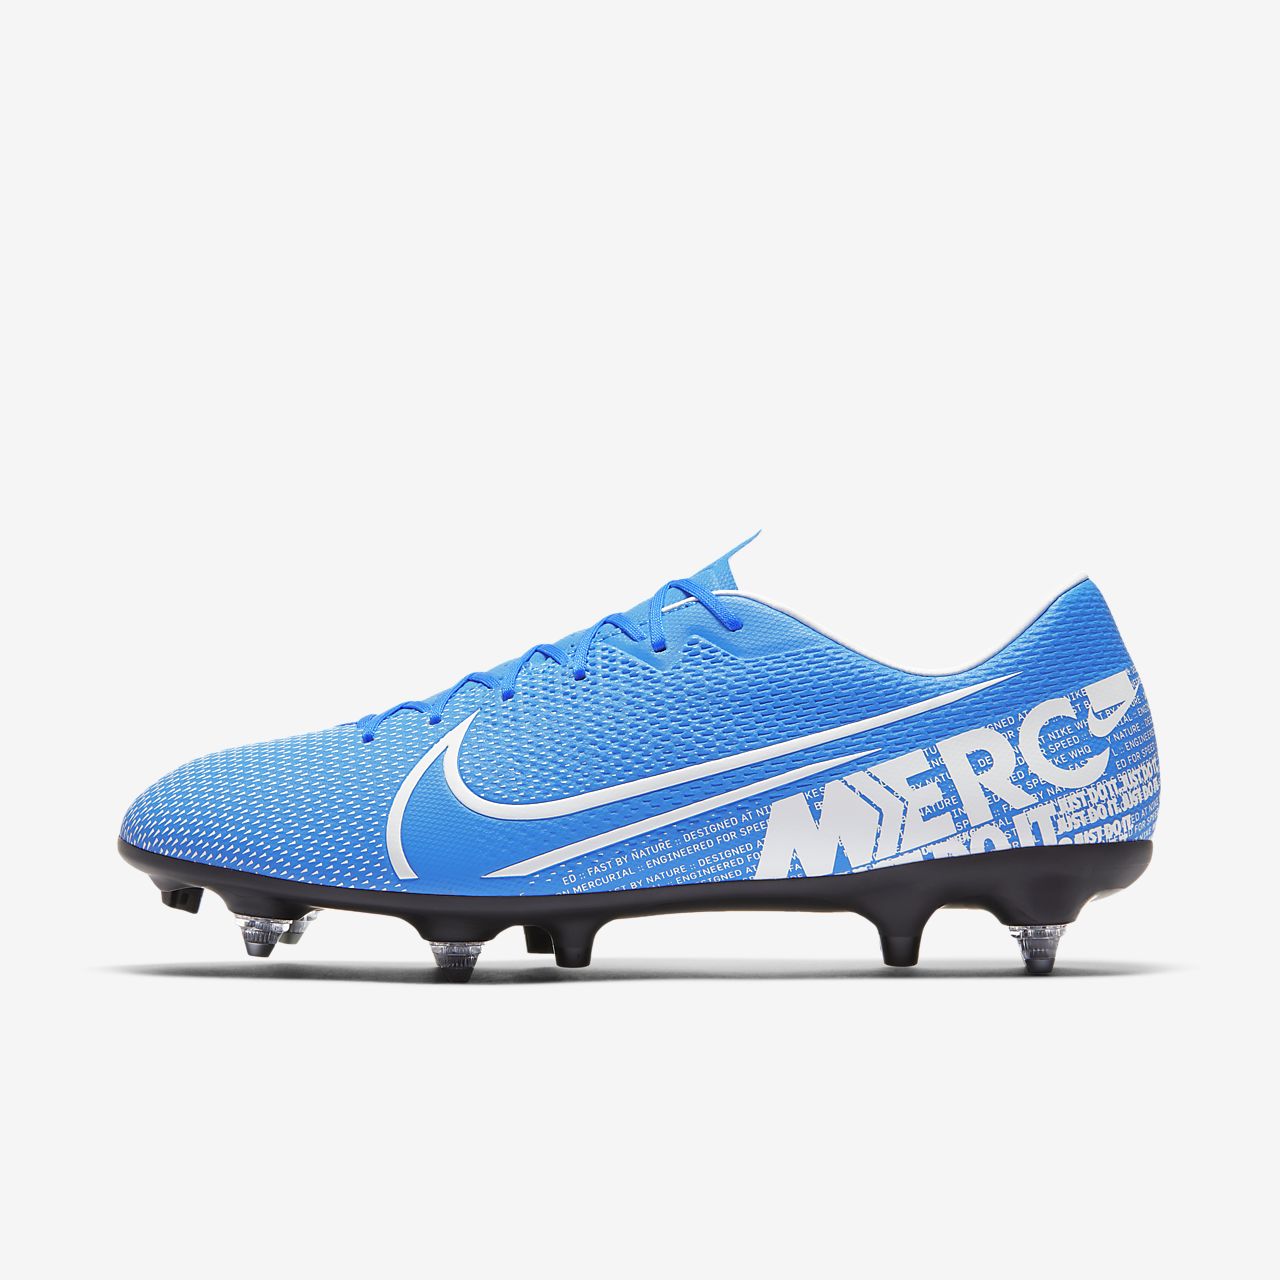 Check Out Kids Nike Mercurial Vapor XII PRO SG Football